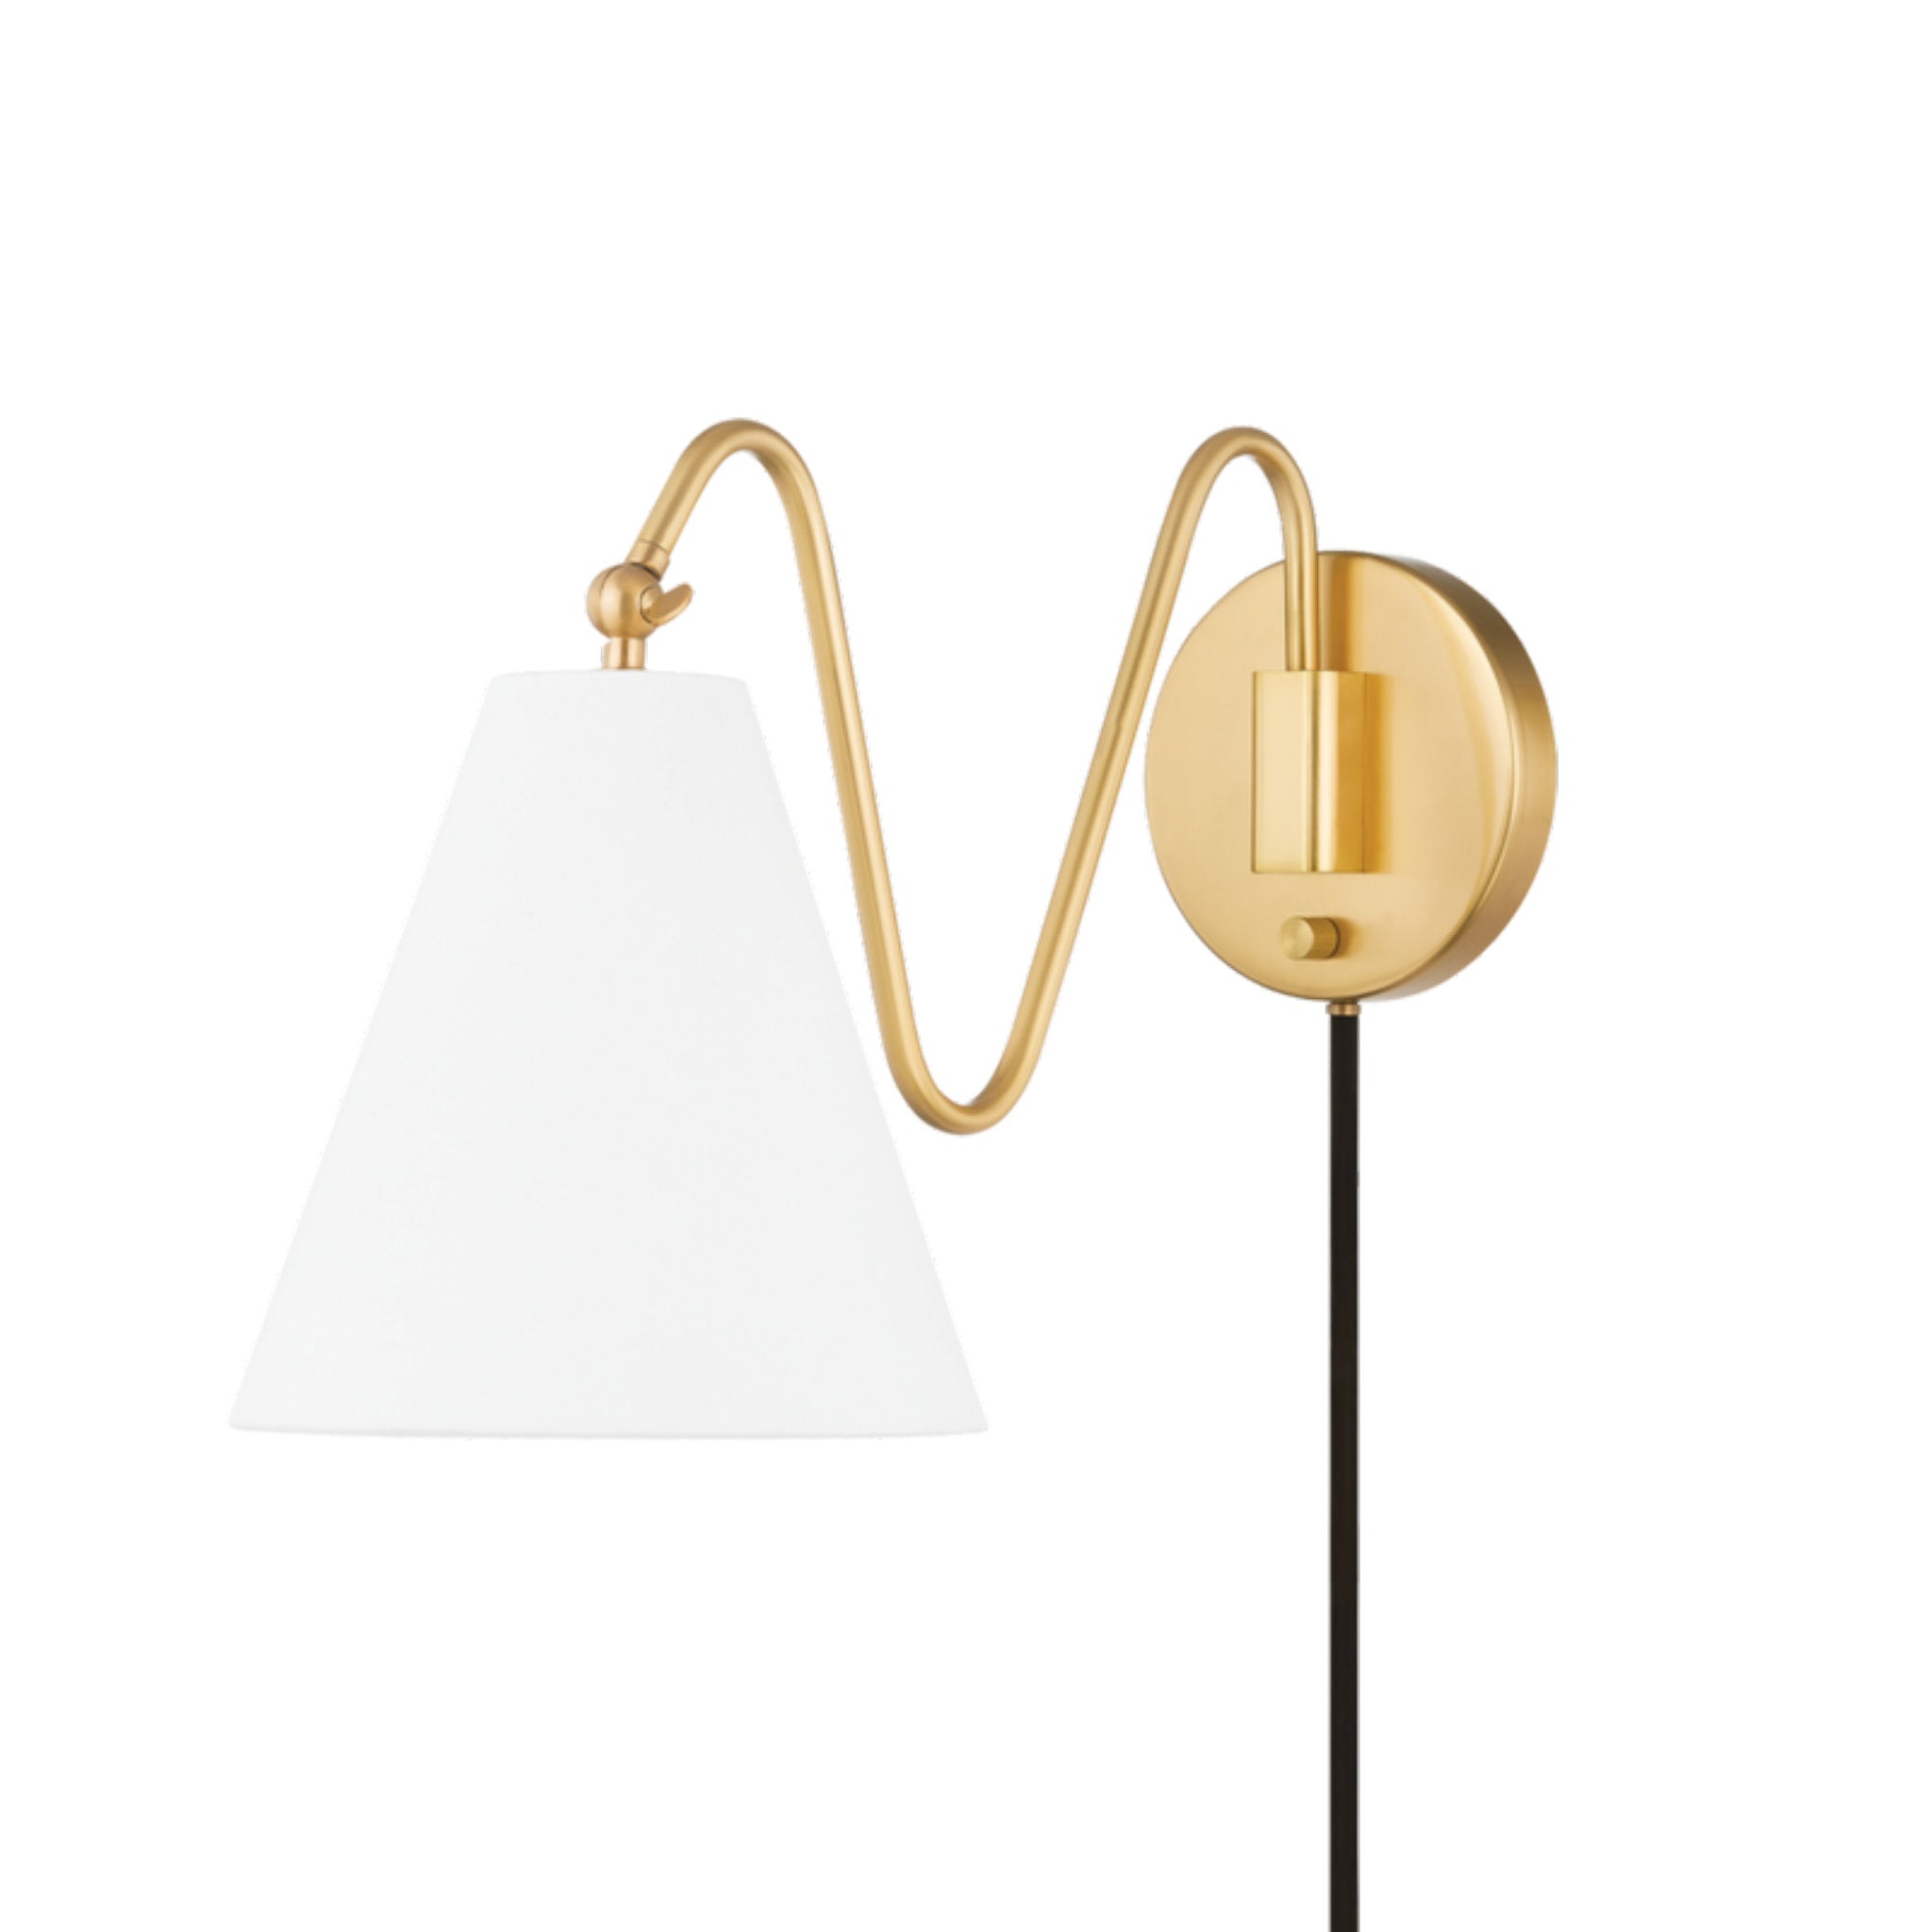 Onda 1-Light Plug-in Sconce in Aged Brass by Tali Roth